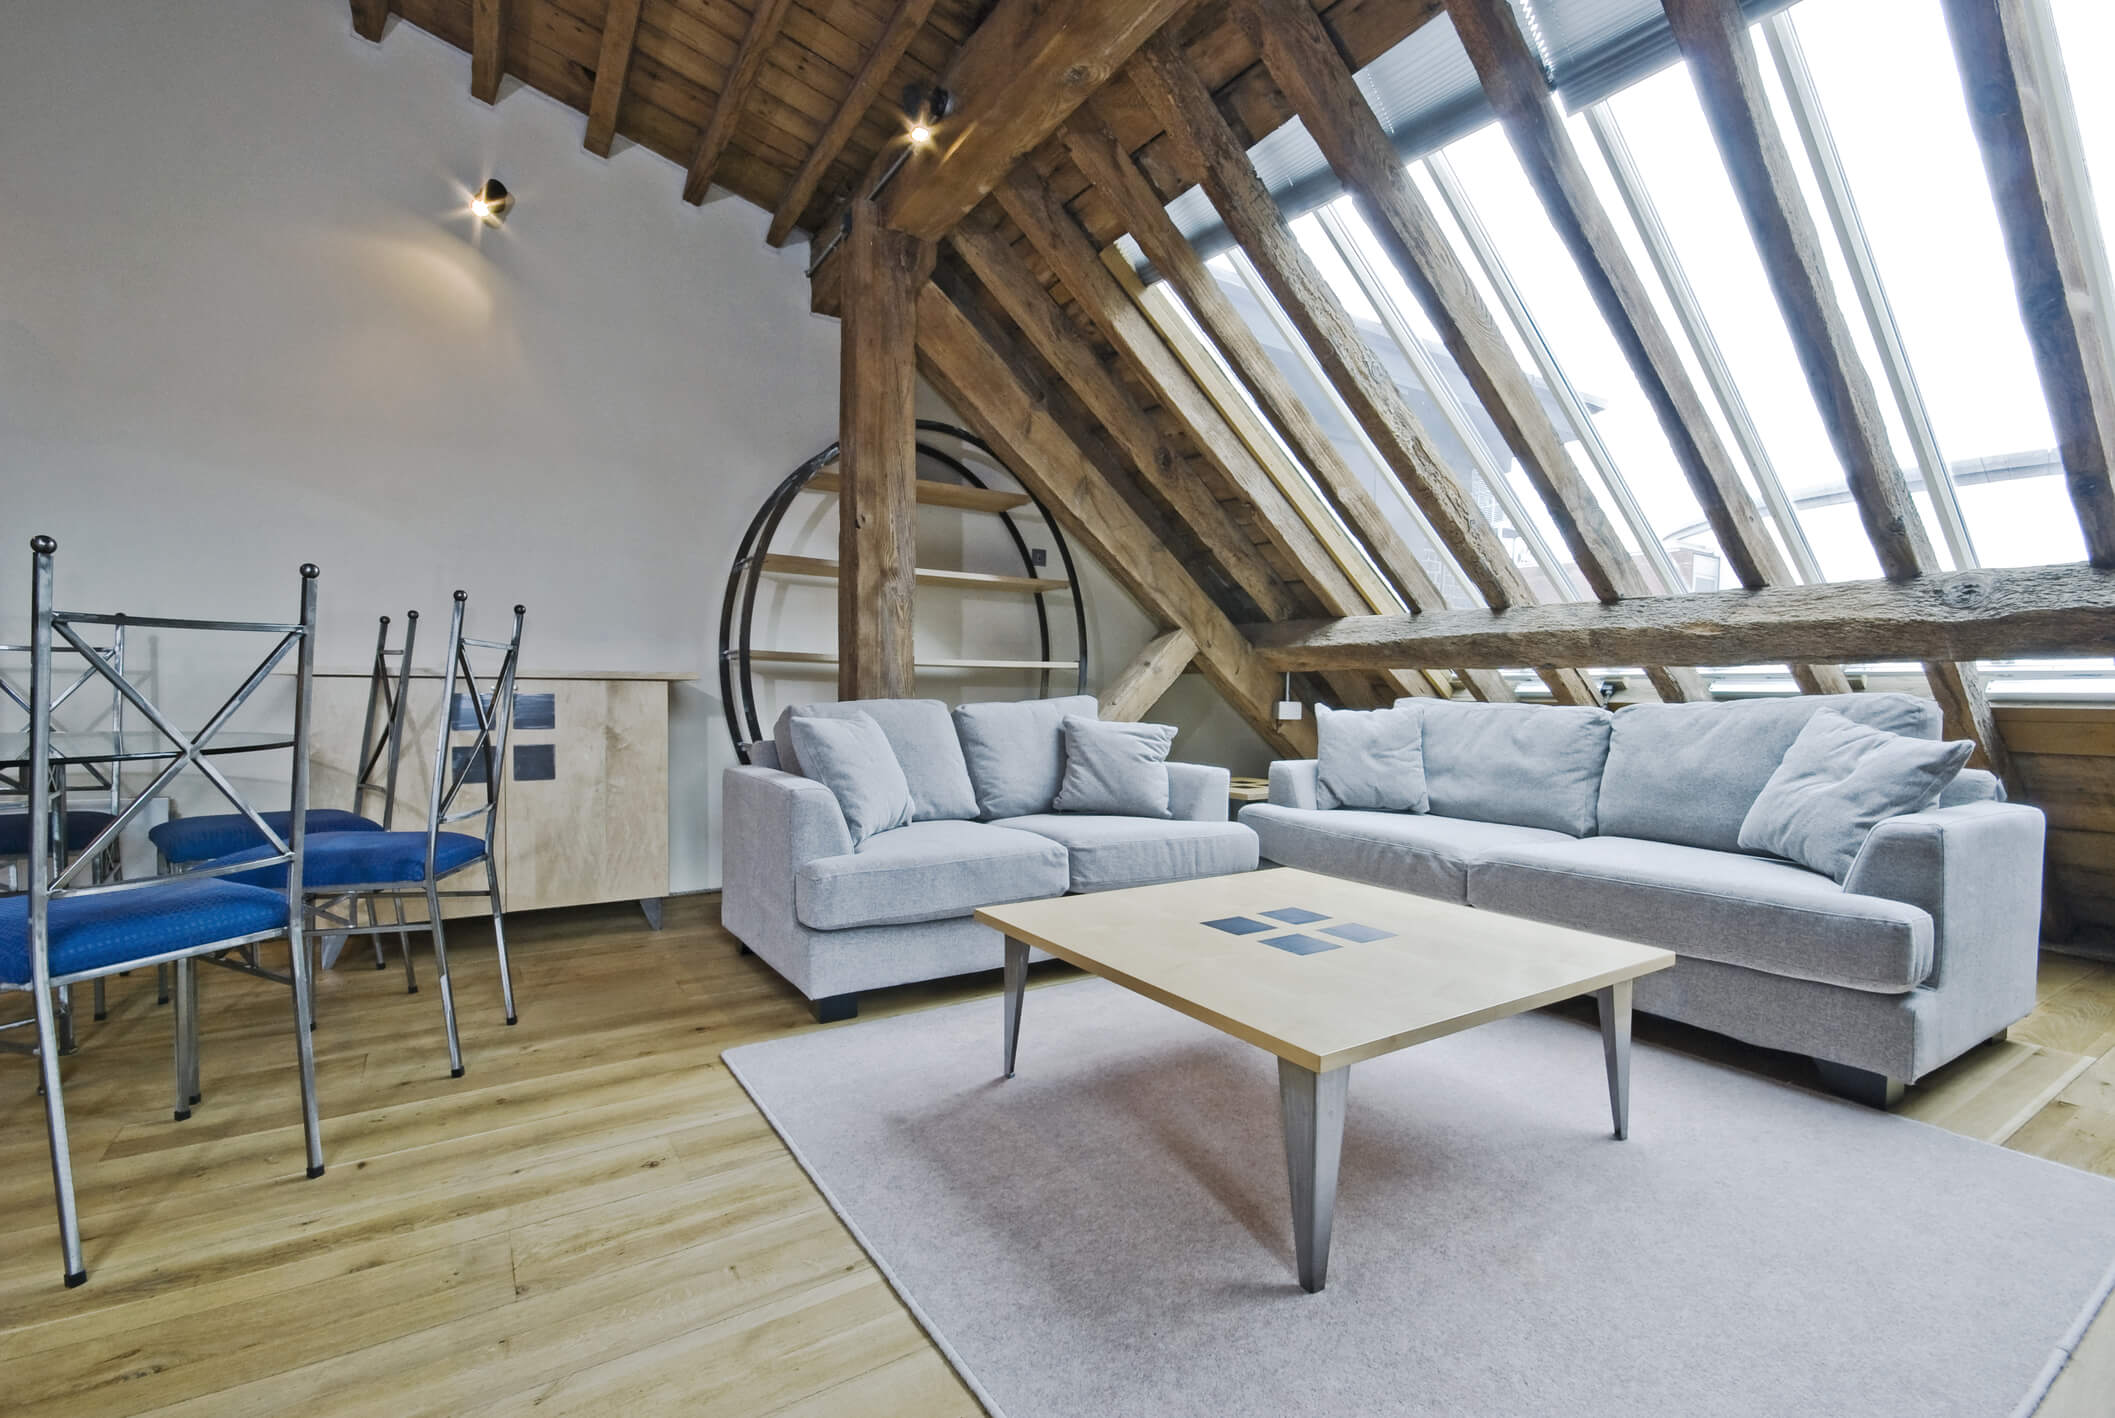 Loft converted into living space